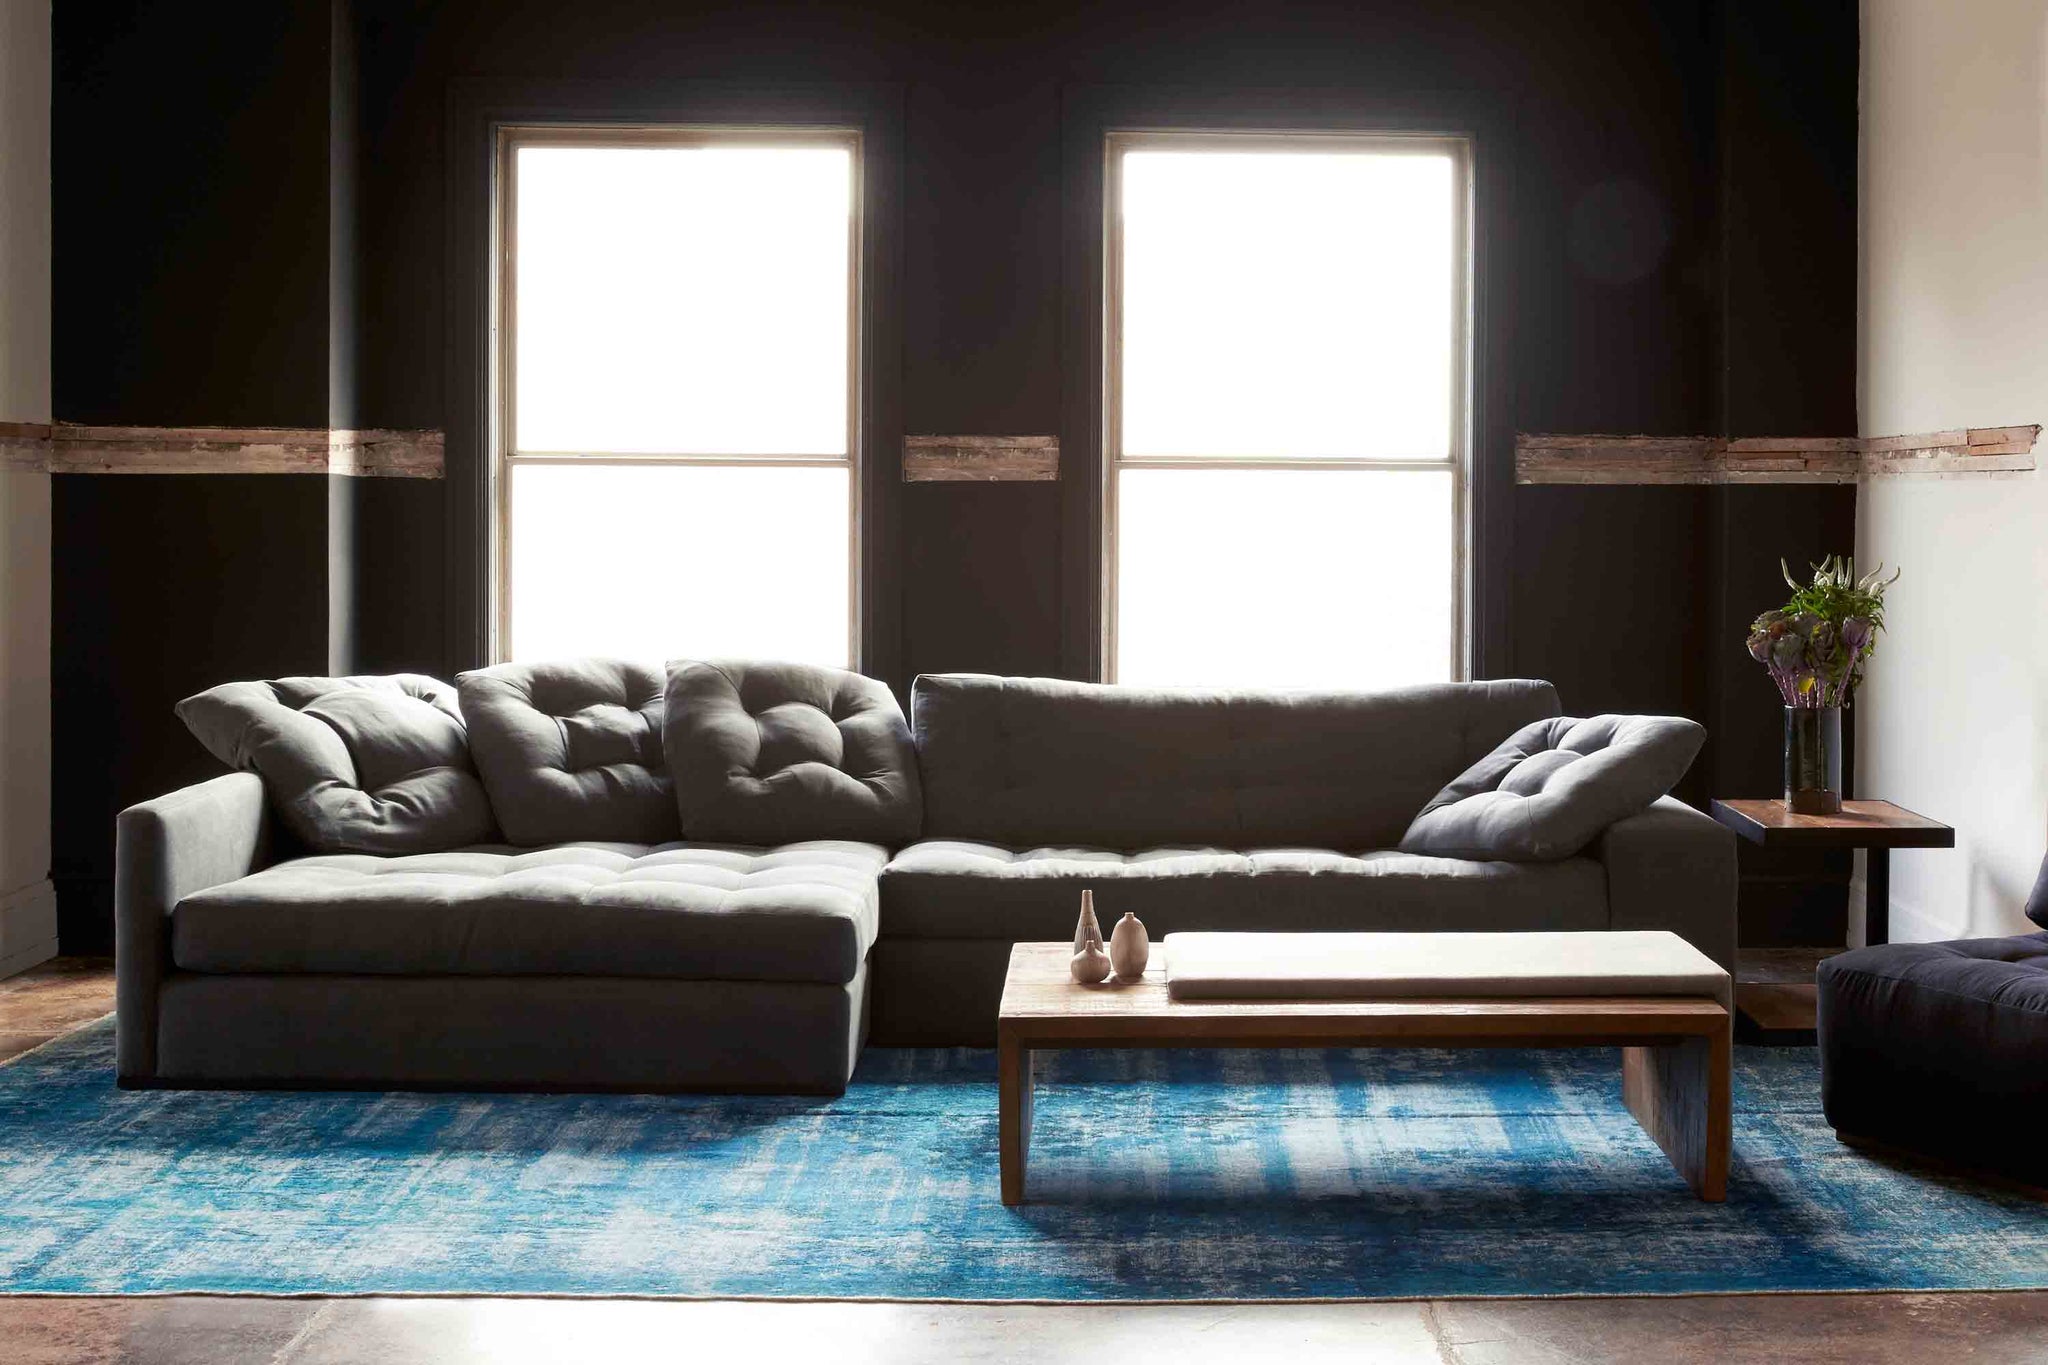  Studio Sectional in Molino Slate next to a wood coffee table and dark ottoman. Underneath the sectional is a blue rug. In the background we see a dark colored wall light shining through the two windows. Photographed in Molino Slate. 